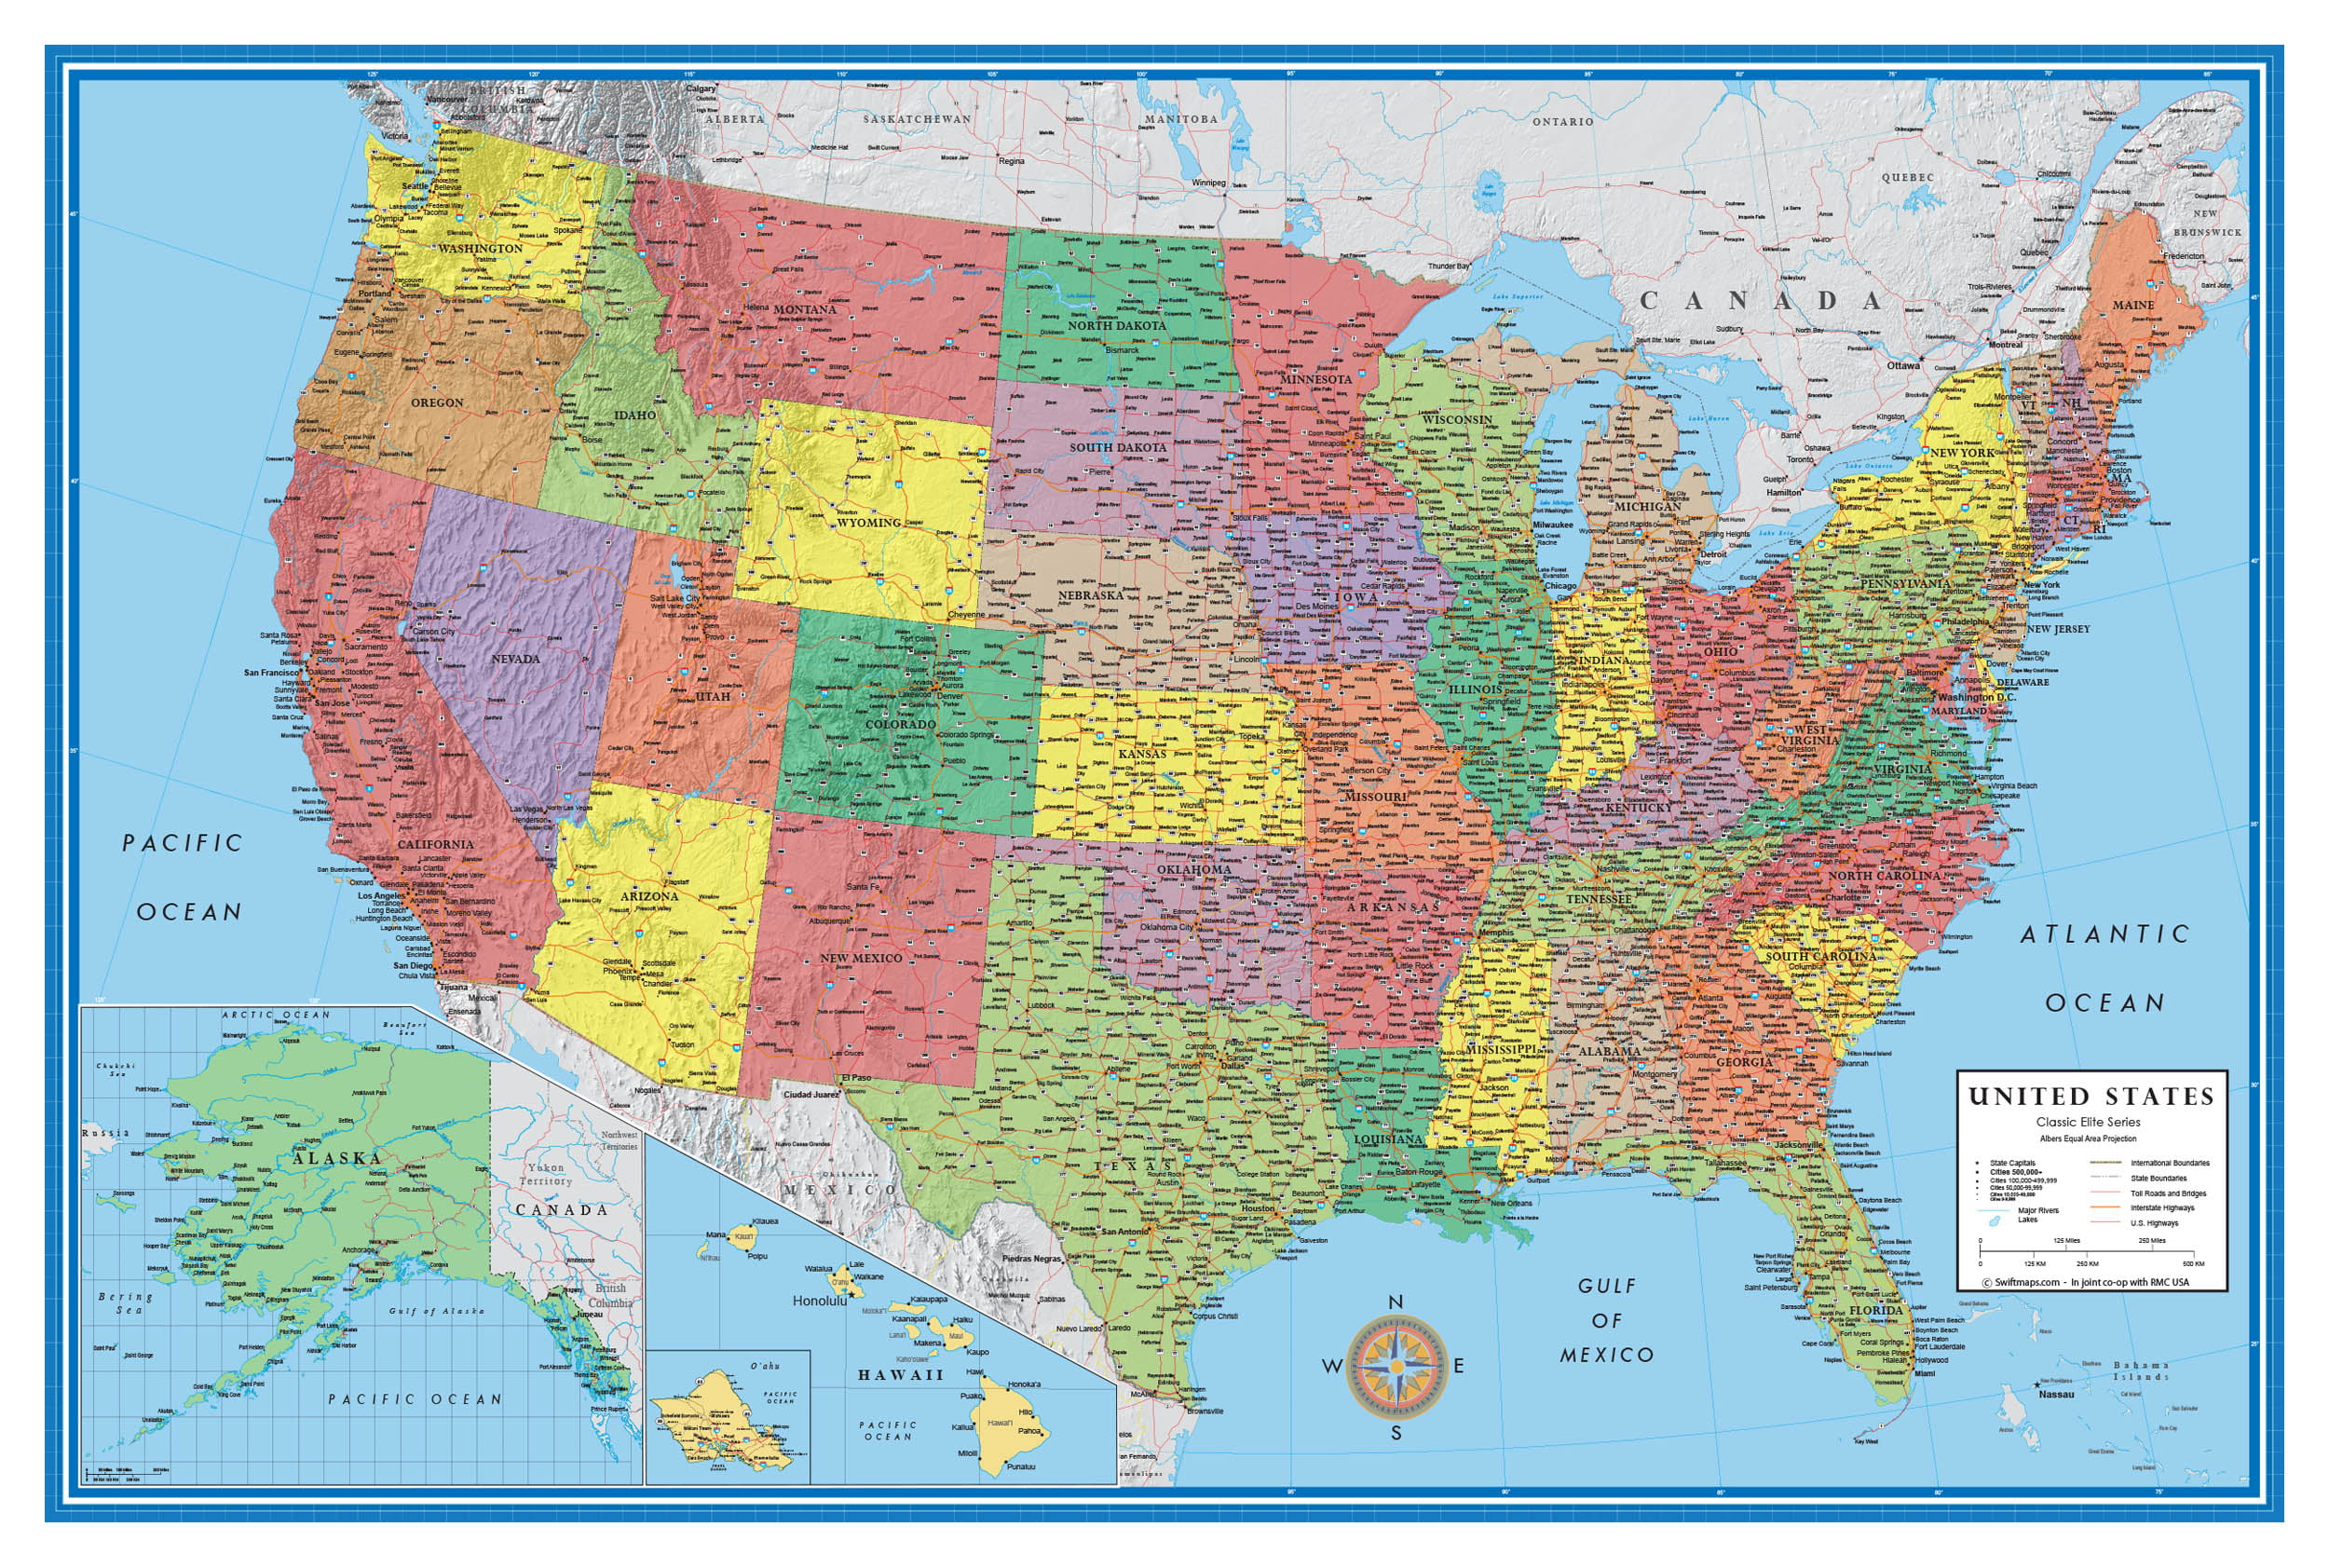 24x36 United States USA US Classic Elite Wall Map Mural Poster Folded